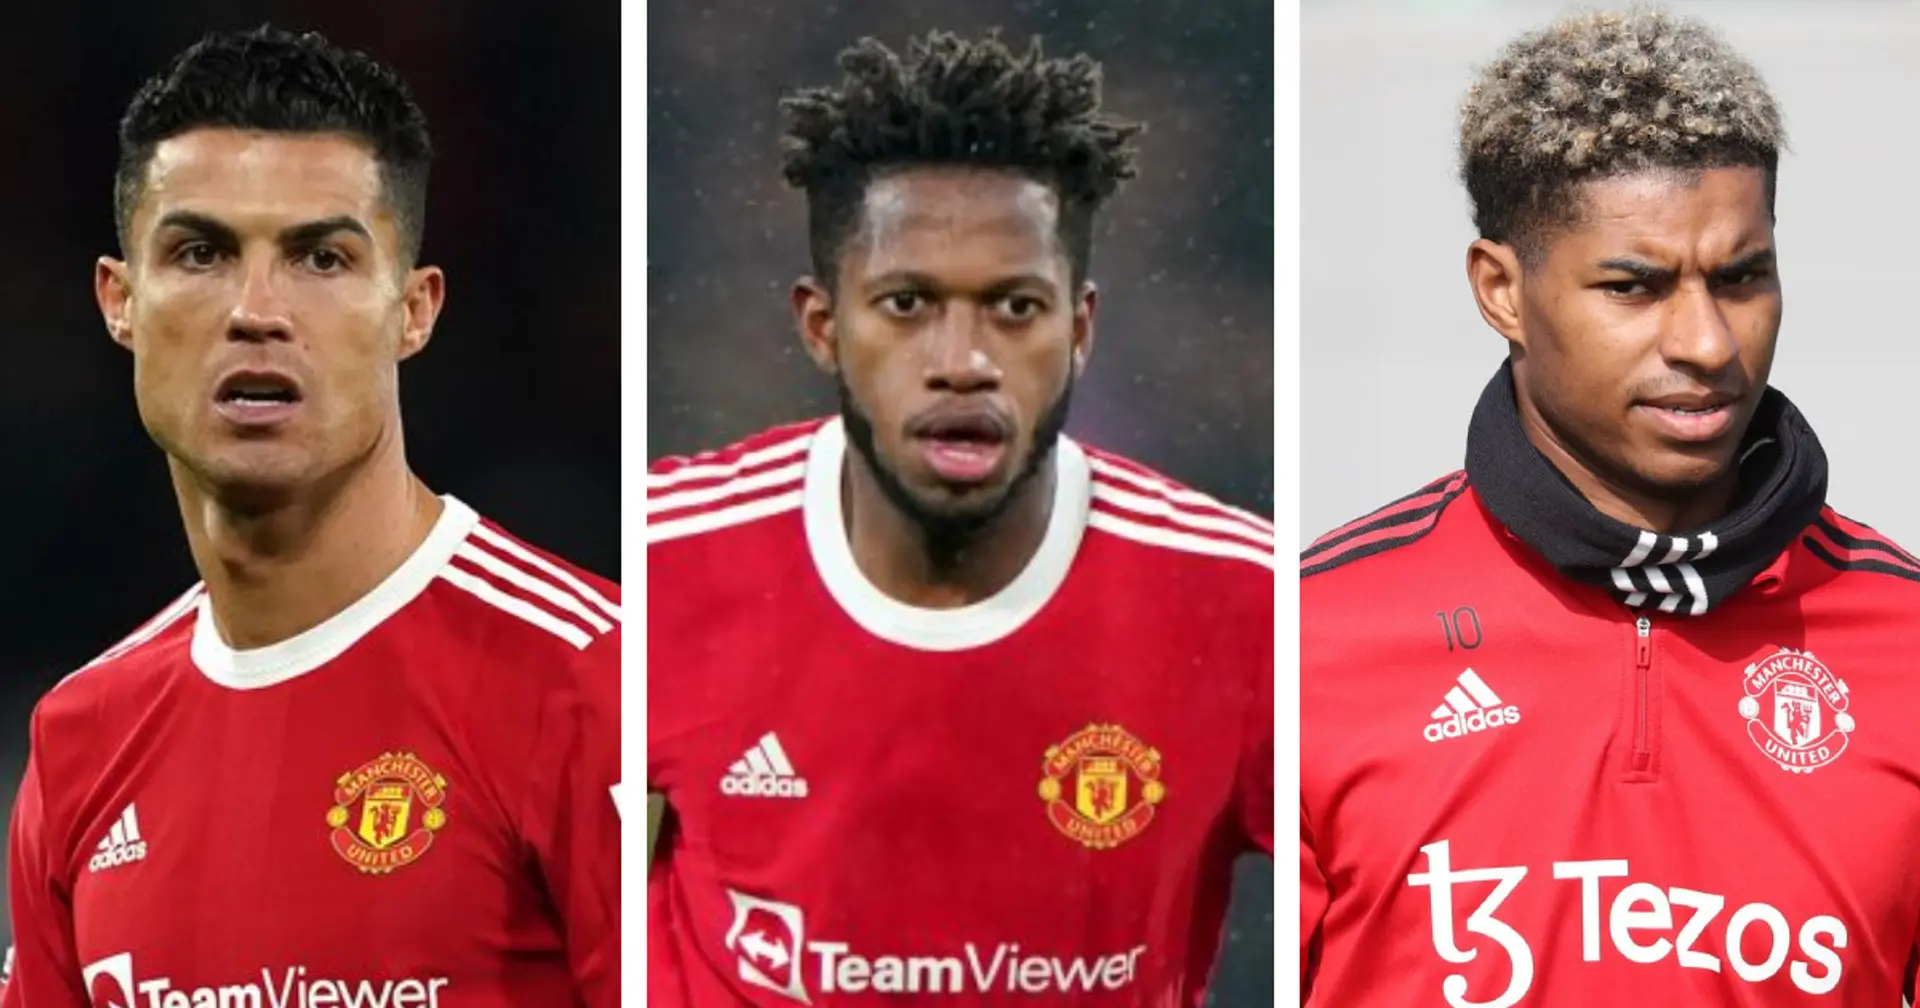 8 players with contracts expiring in 12 months: Latest Man United contract round-up